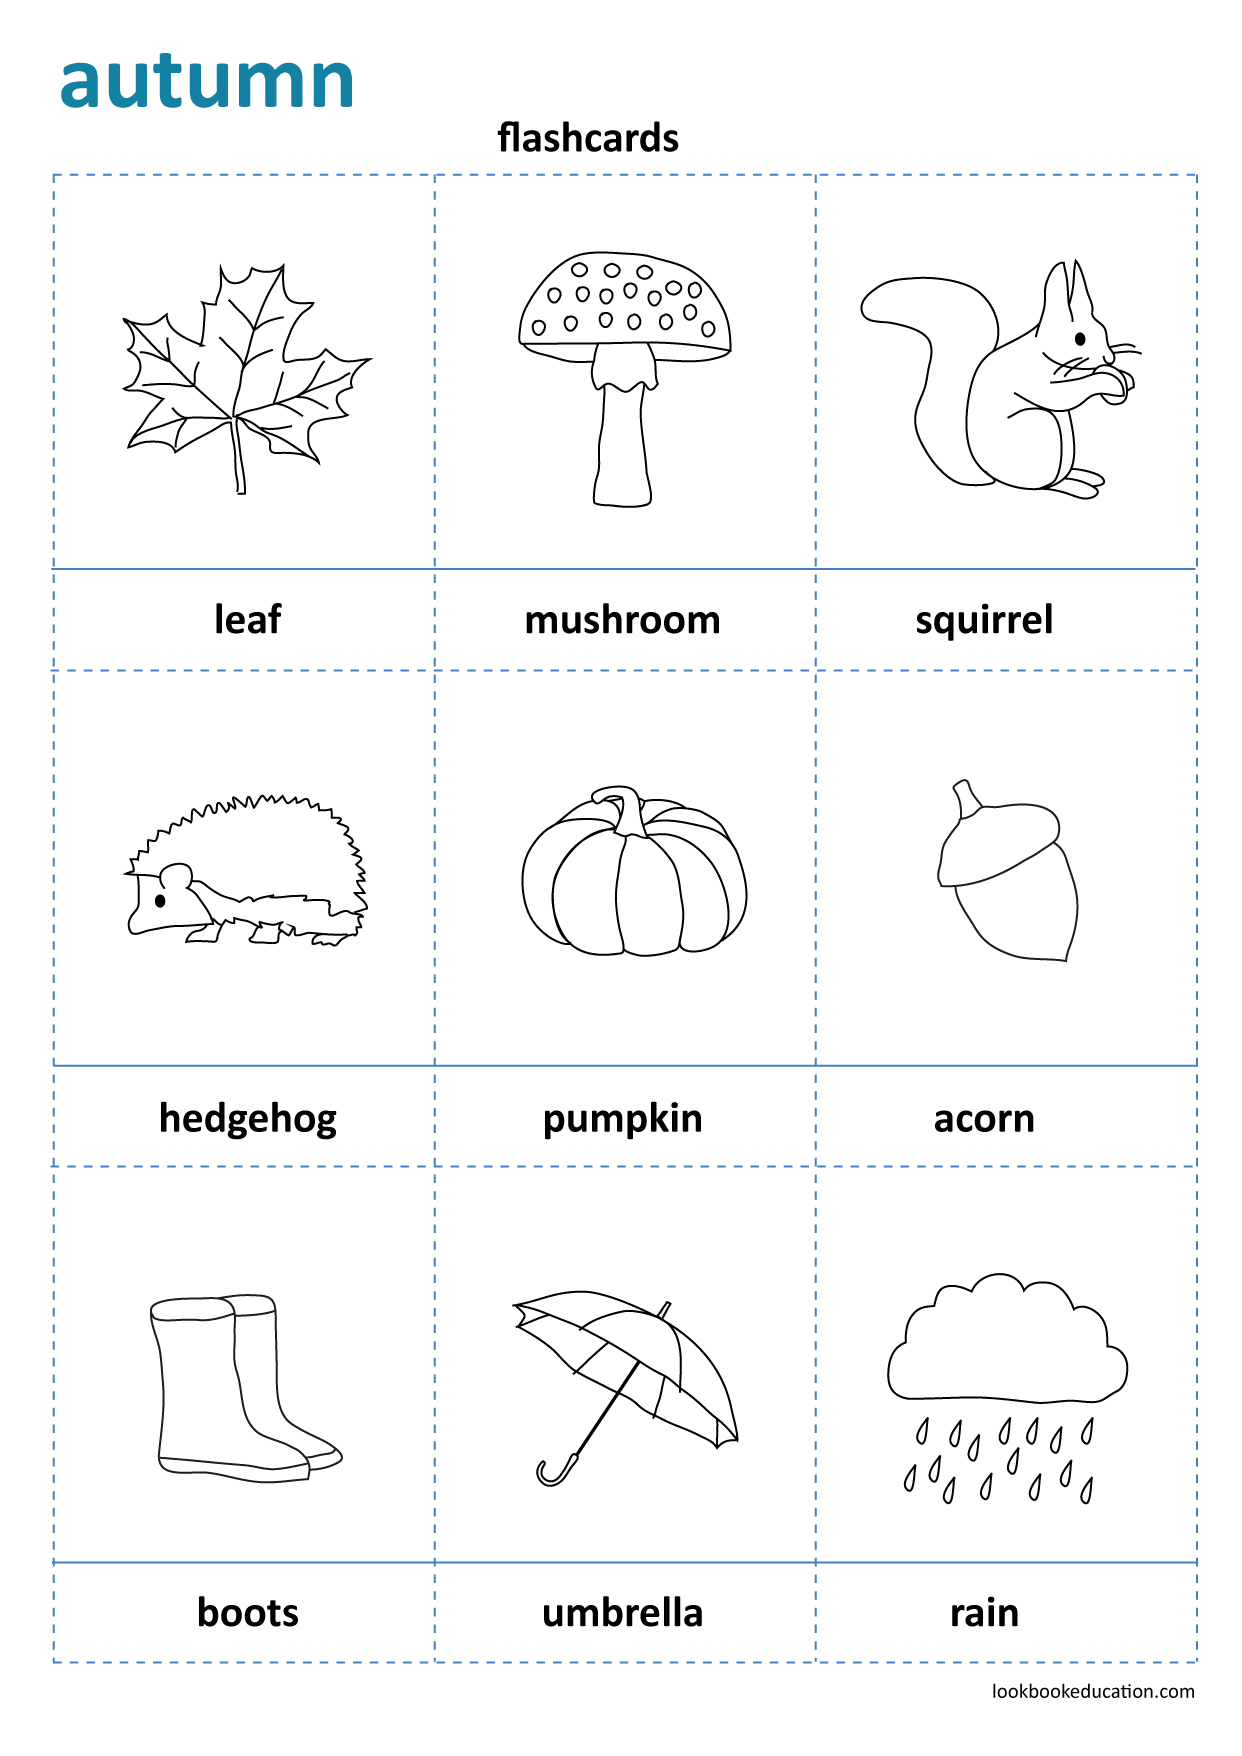 fruits-worksheet-10-circle-only-the-autumn-fruits-fall-fruits-kids-worksheets-printables